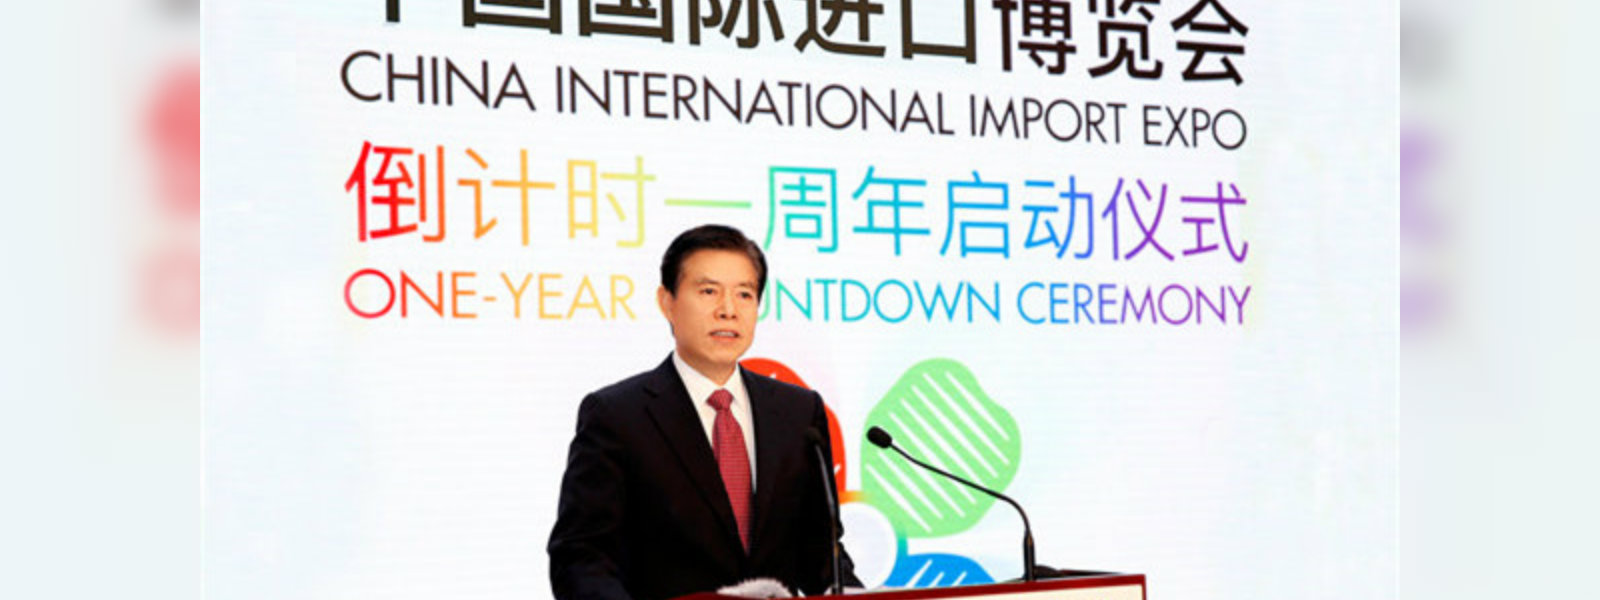 China attracts 3,600 companies to import expo 